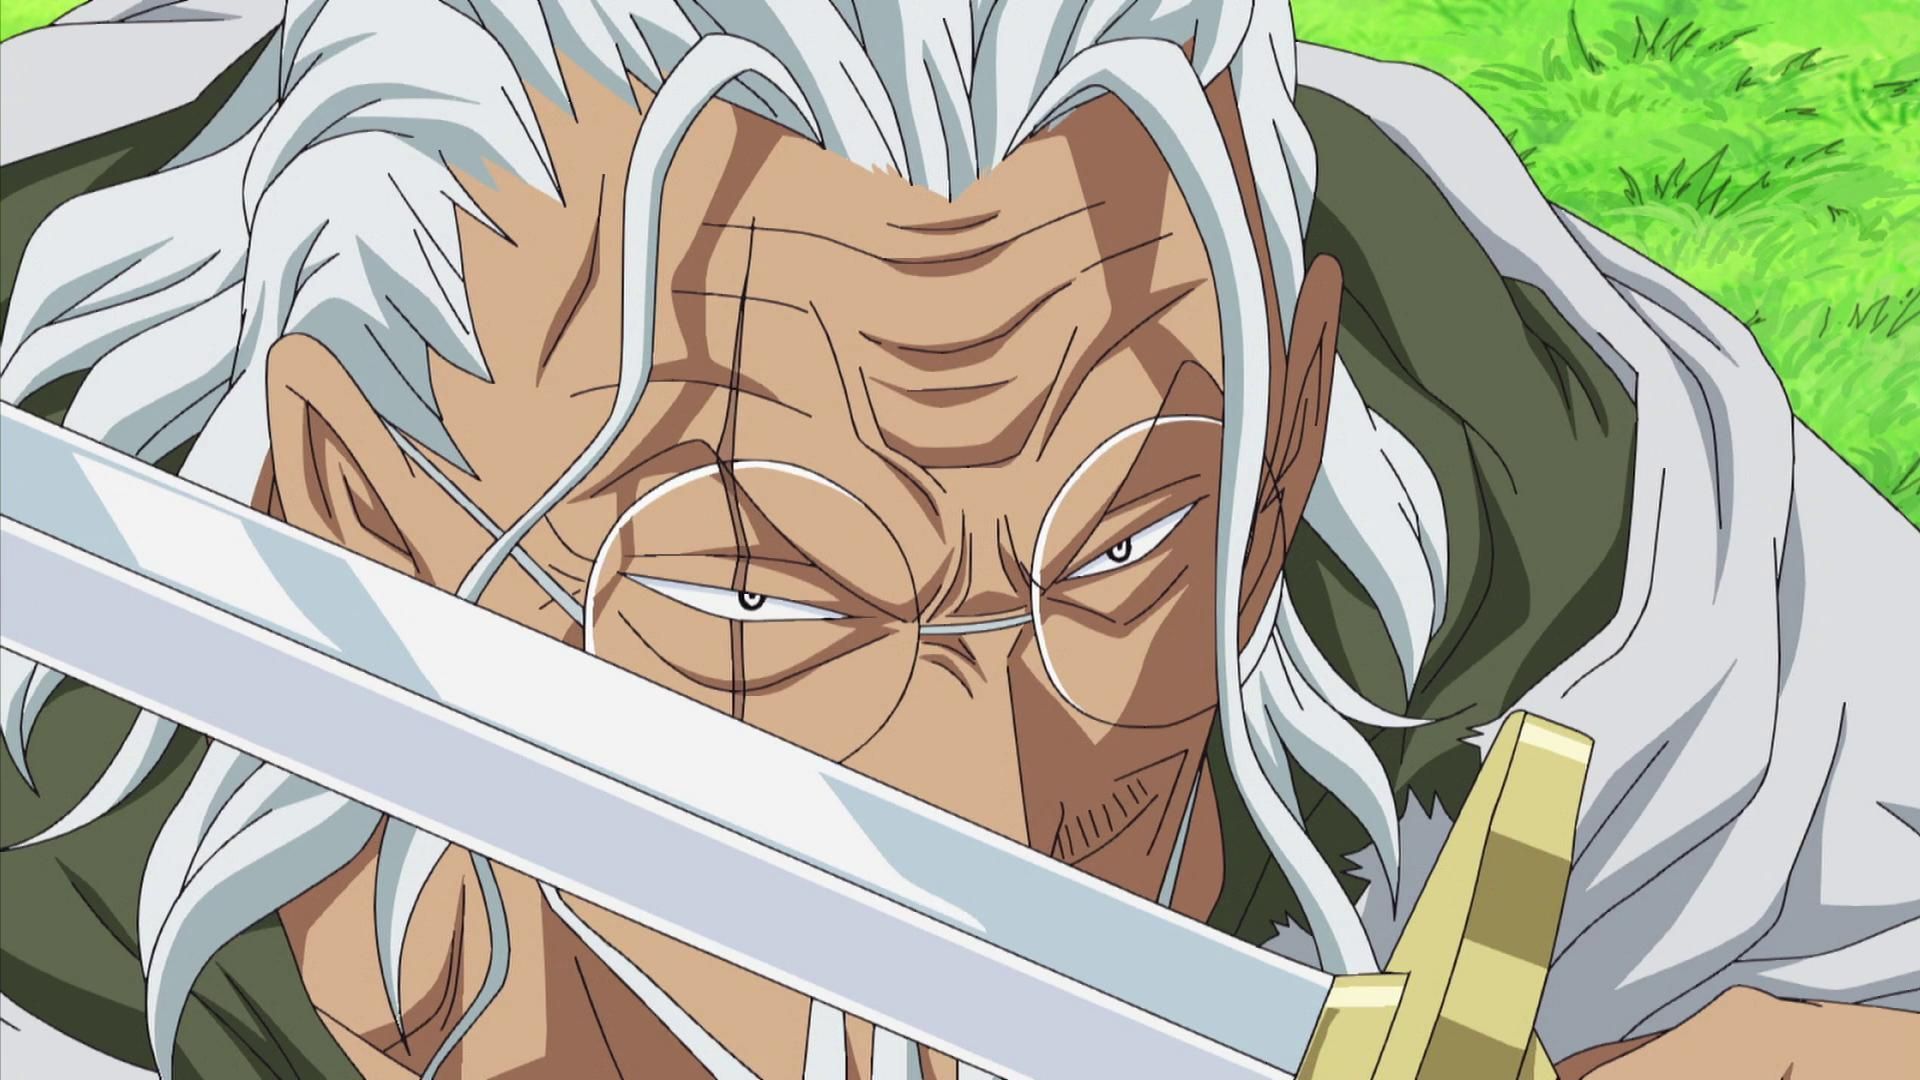 Silvers Rayleigh during his battle with Kizaru in Sabaody Archipelago (Image via Toei Animation, One Piece)